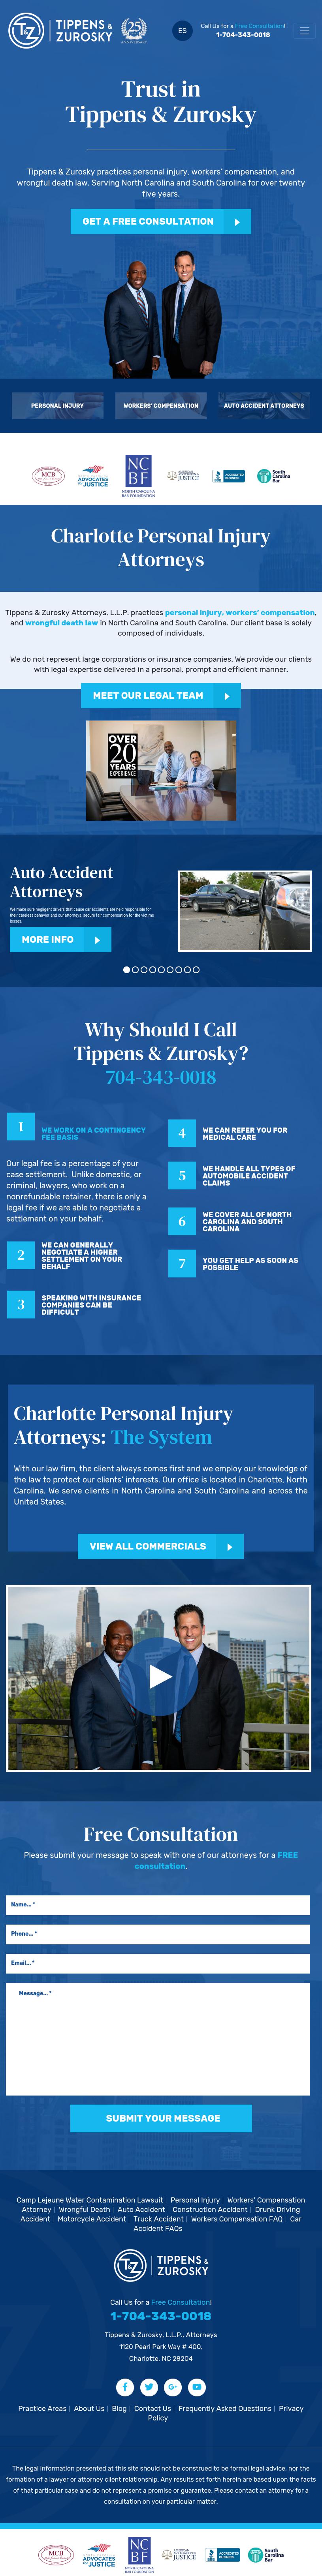 Tippens and Zurosky - Charlotte NC Lawyers